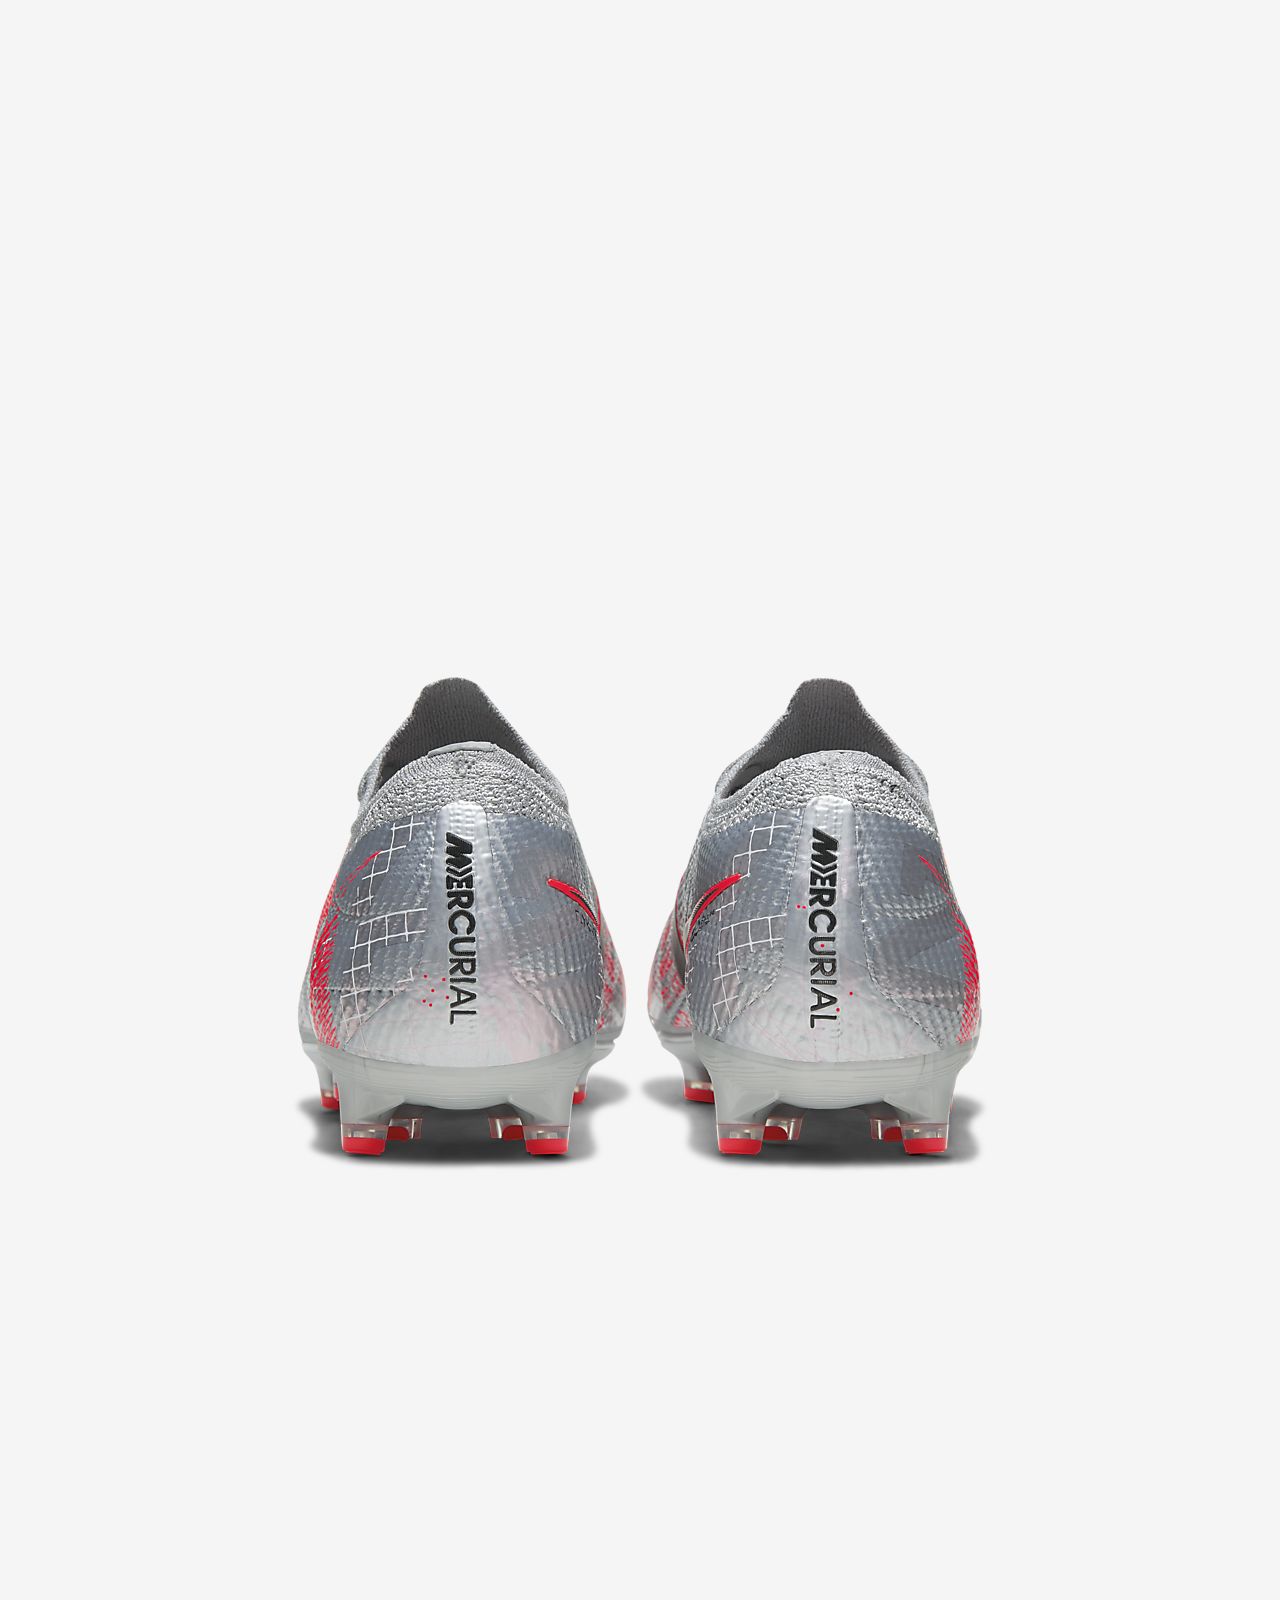 Review of the Nike Mercurial Vapor XIII Pro MDS TF Men 's.